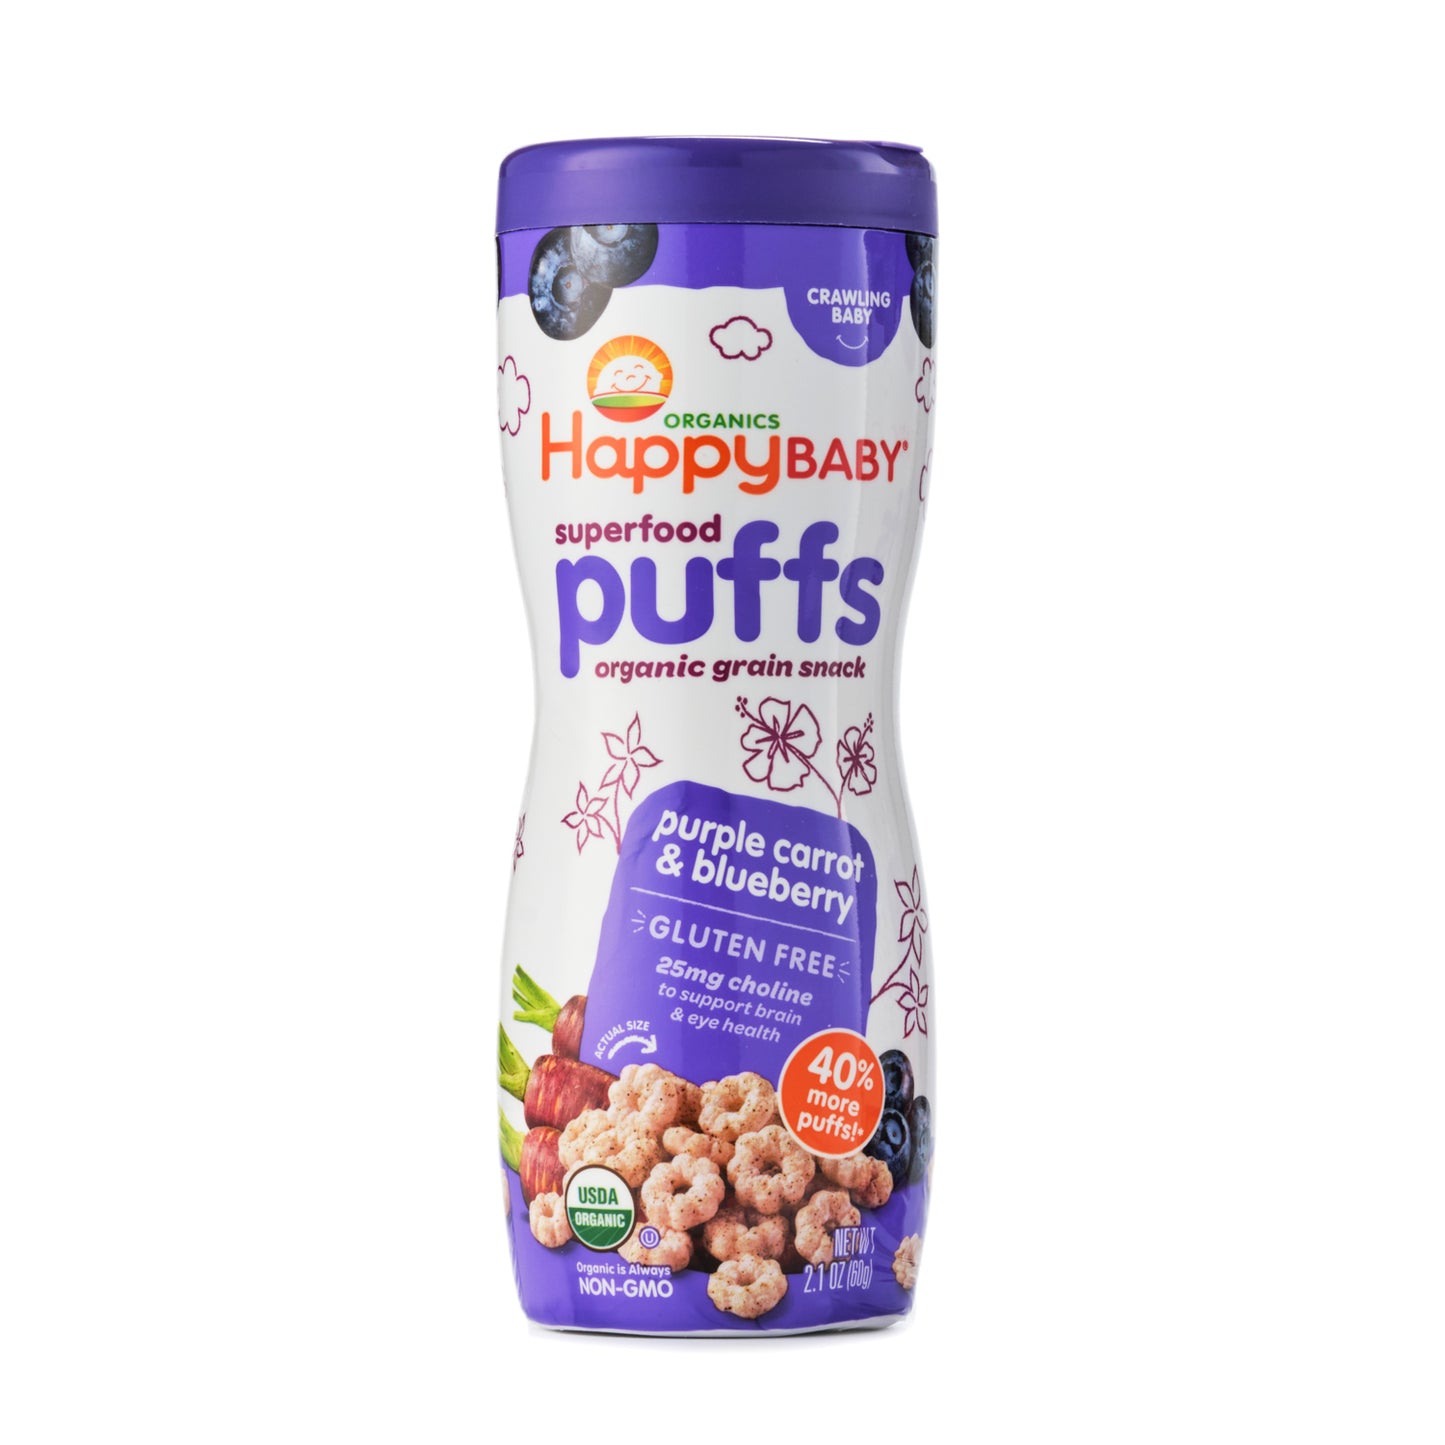 Happy Baby Superfood Puffs Purple Carrot & Blueberry 60g